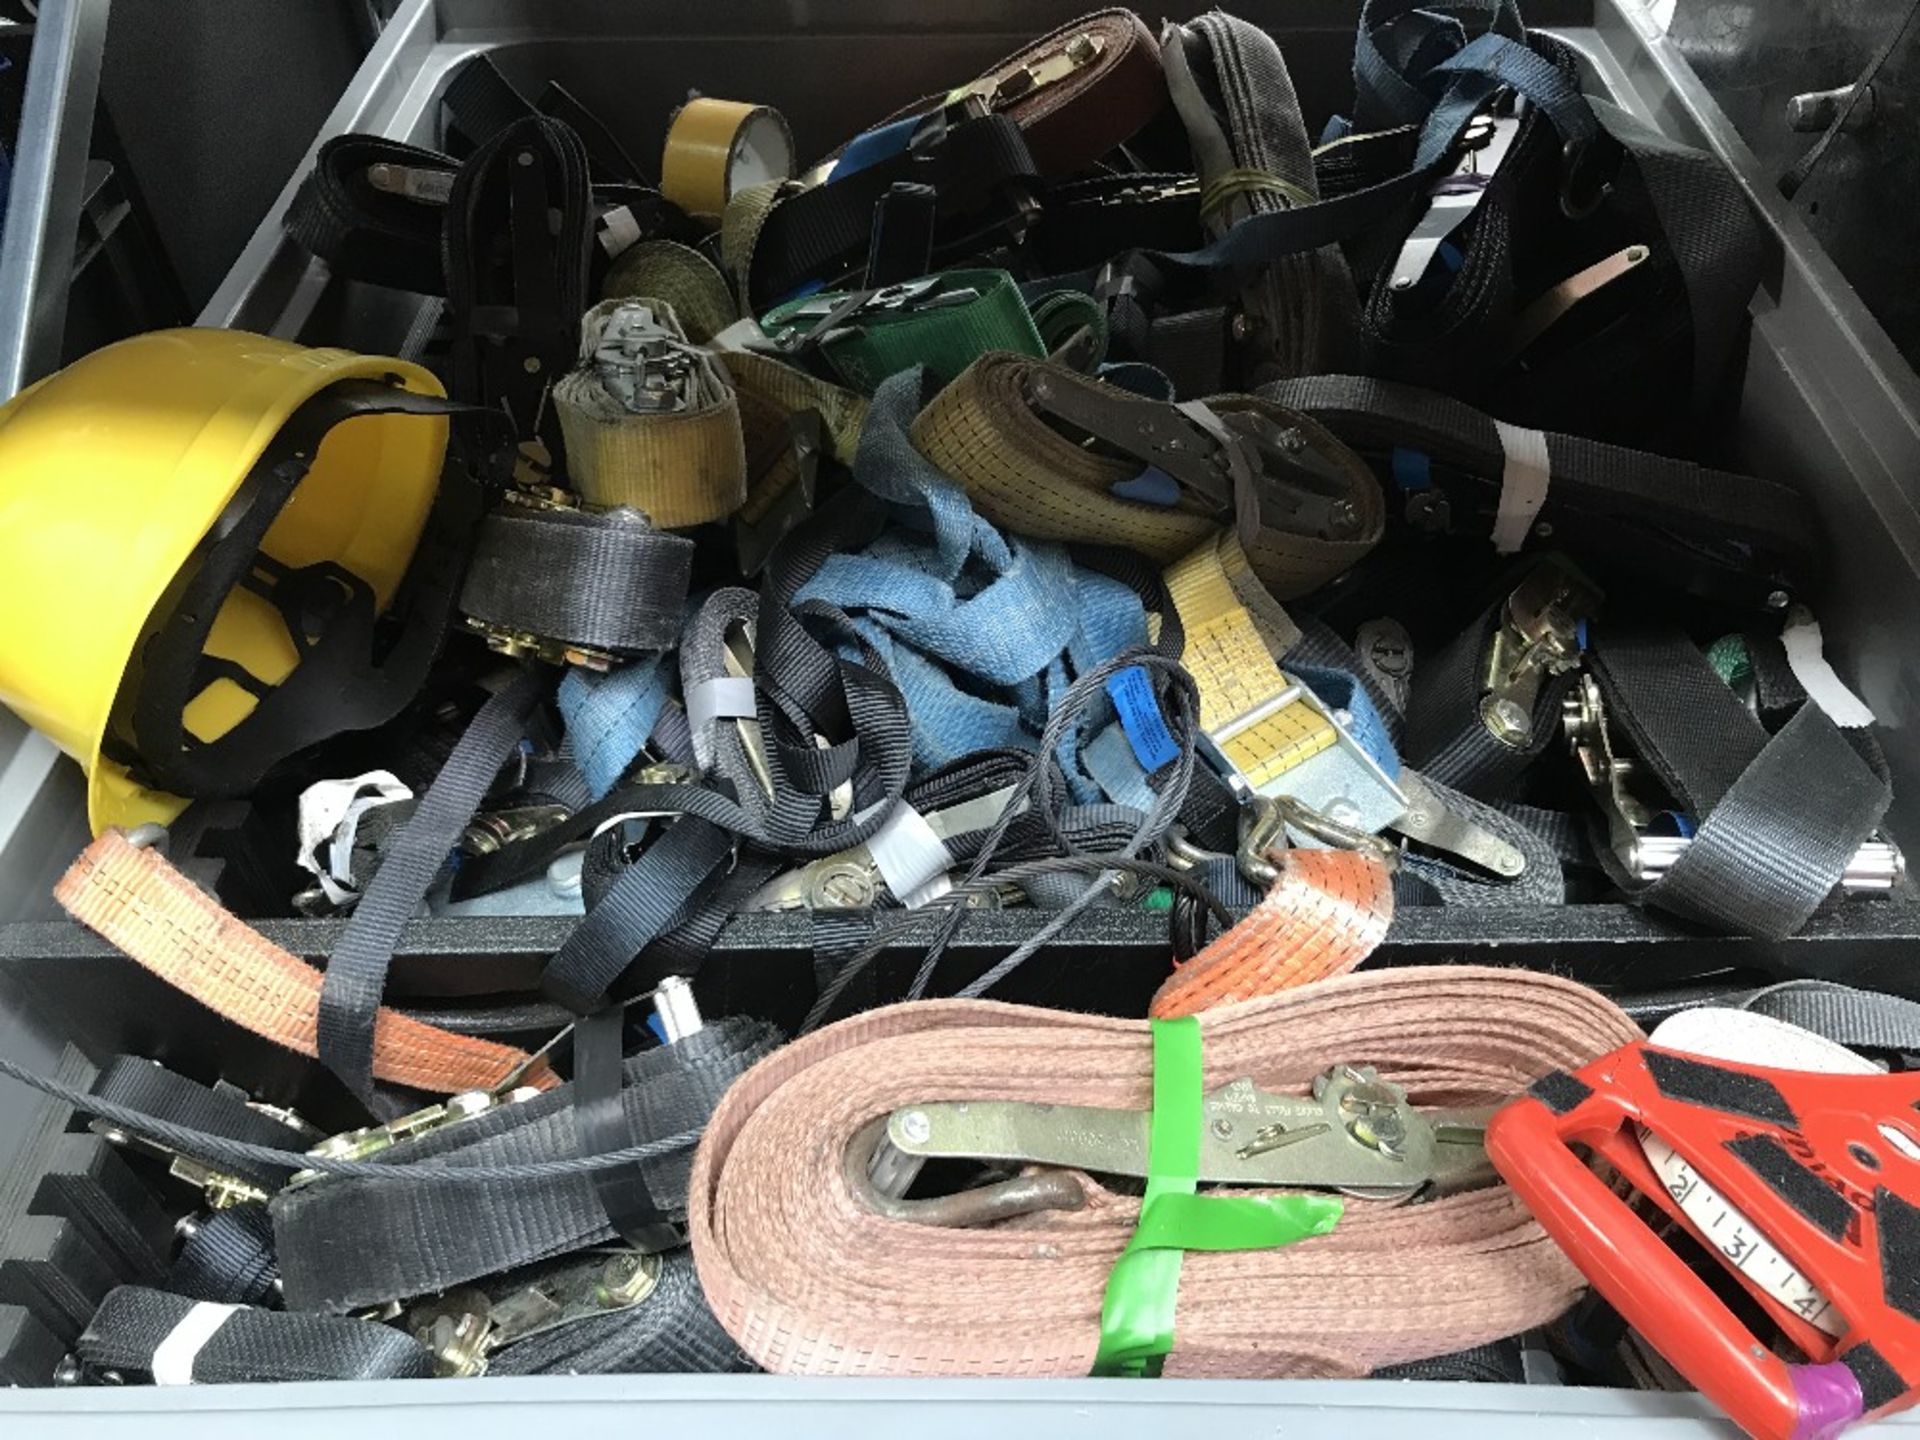 Mobile Plastic Heavy Duty Linbin With Contents Of Ratchet Straps - Image 2 of 2